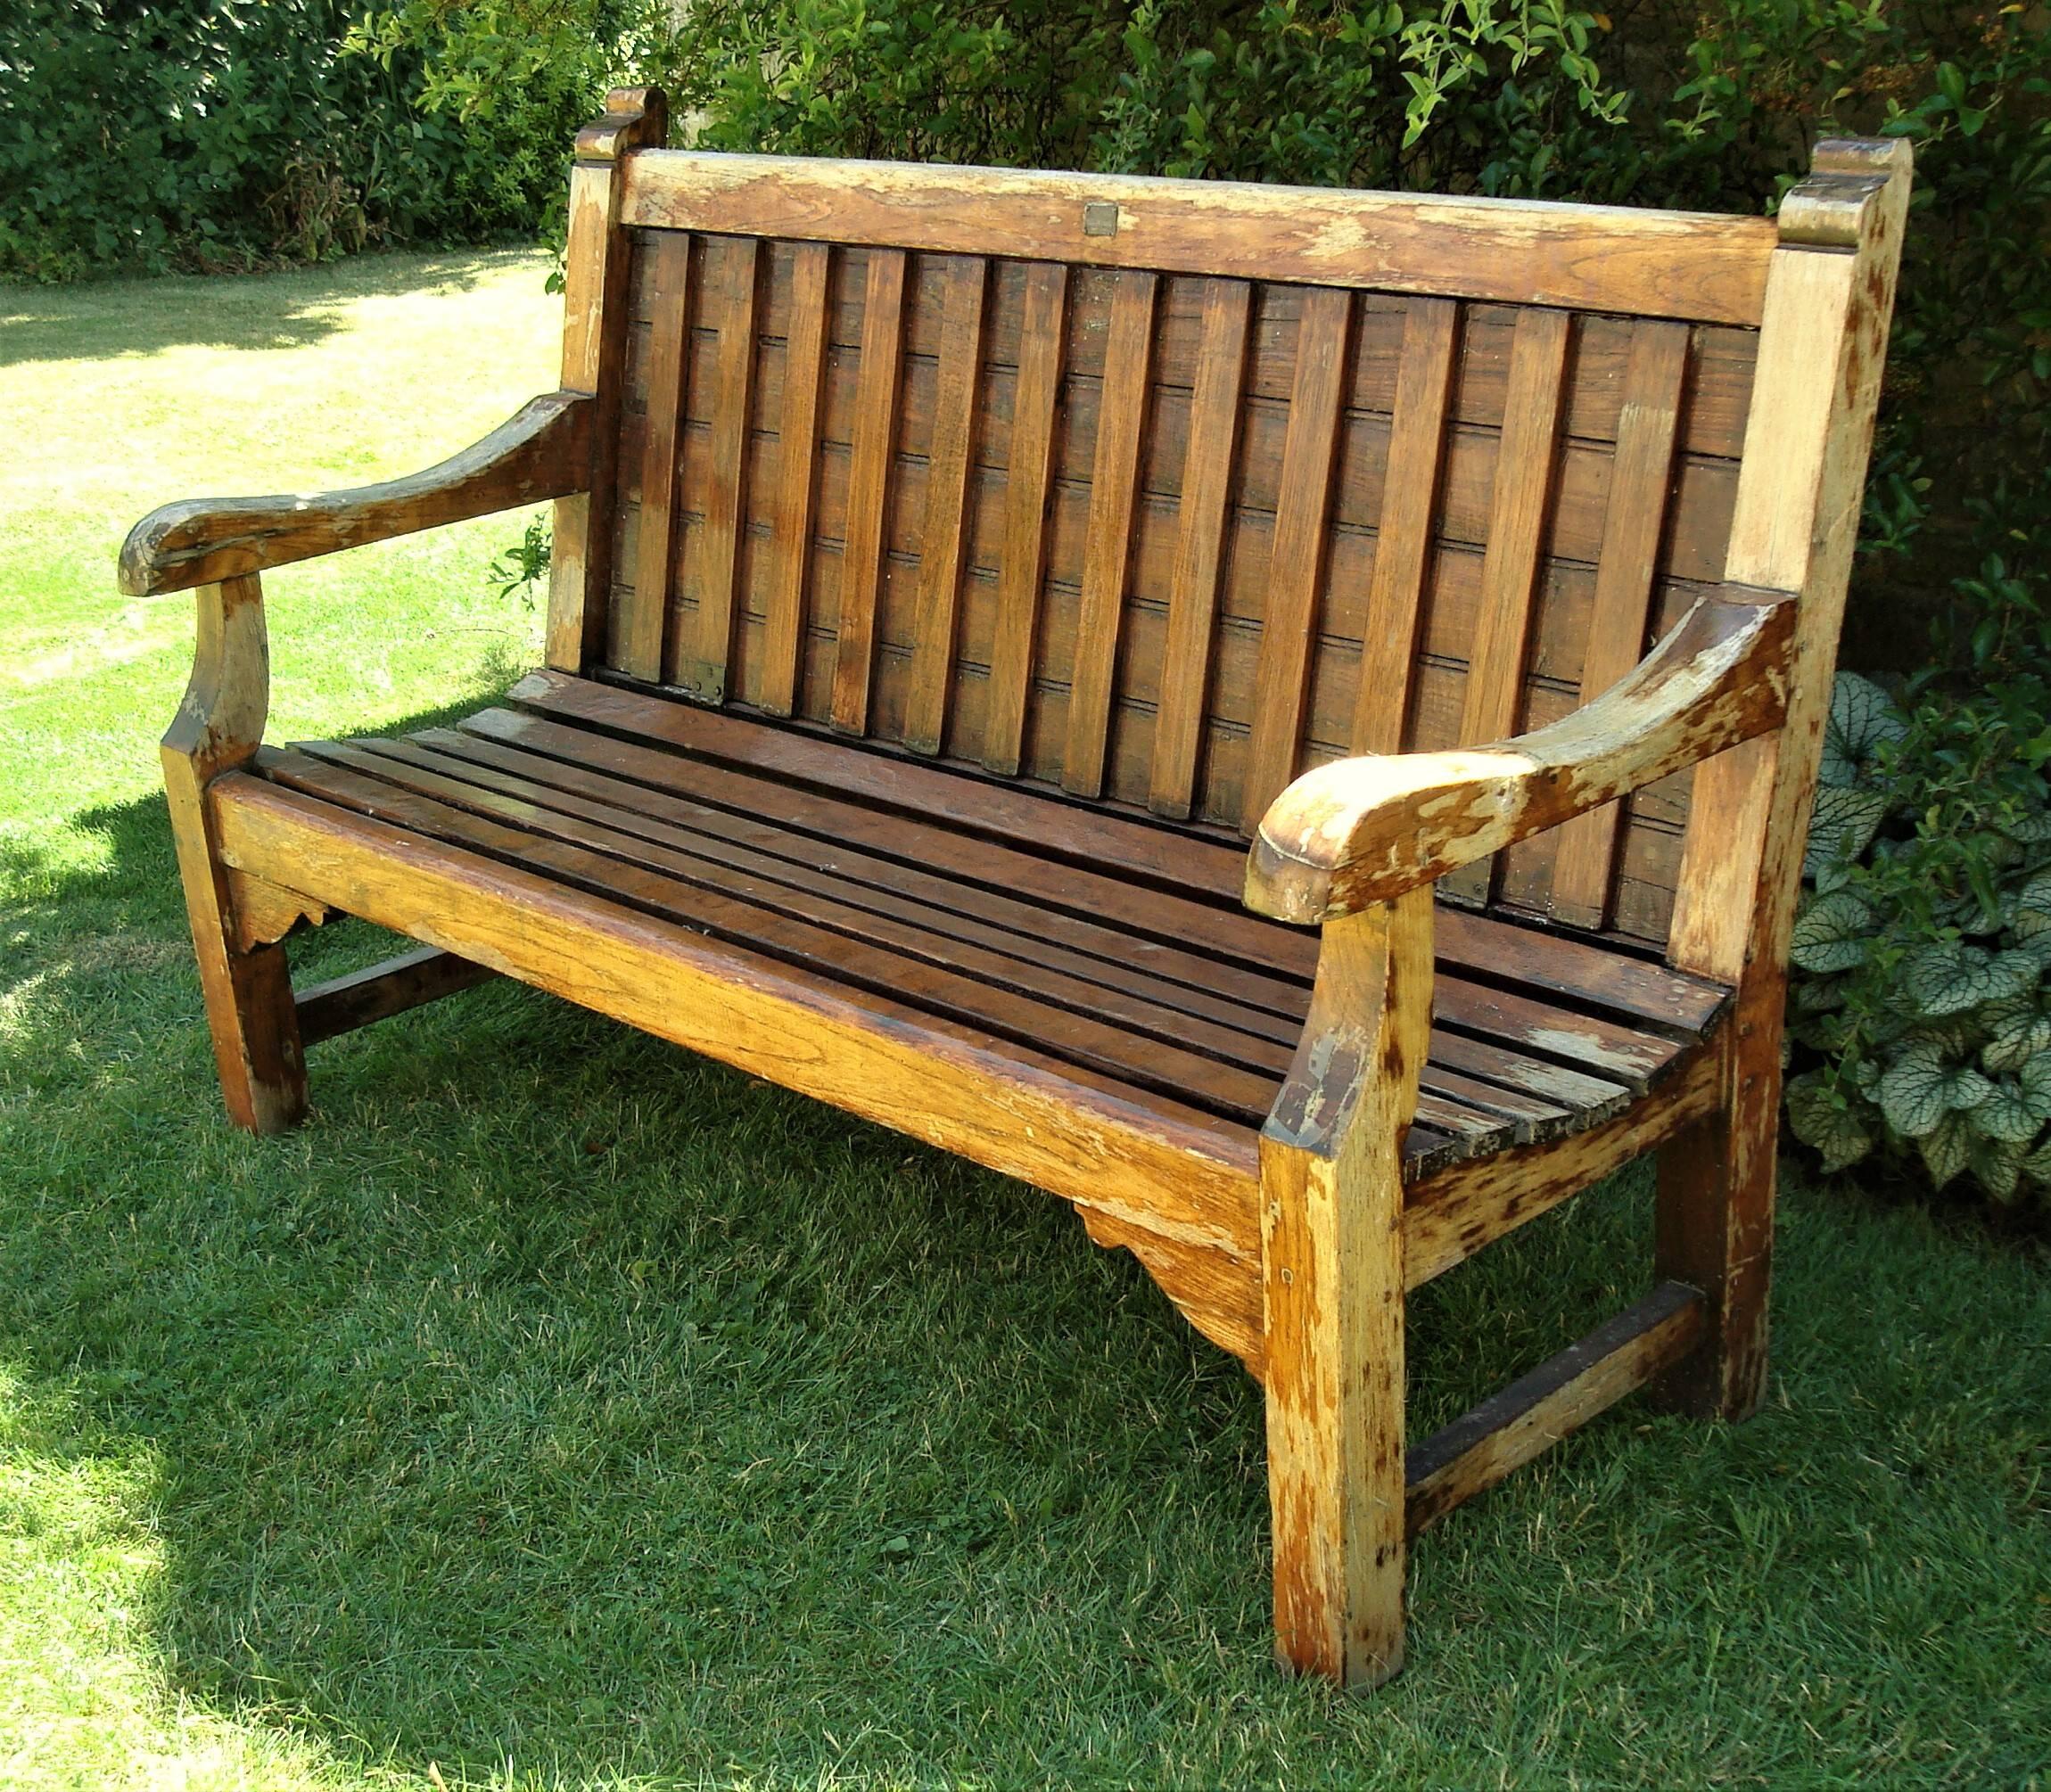 A rare early 20th century teak ship's bench, garden seat; having the very unusual feature of the inset slatted back being hinged to fold down, covering the seat, with the purpose of keeping the seat dry from rain or sea spray. The shaped arms